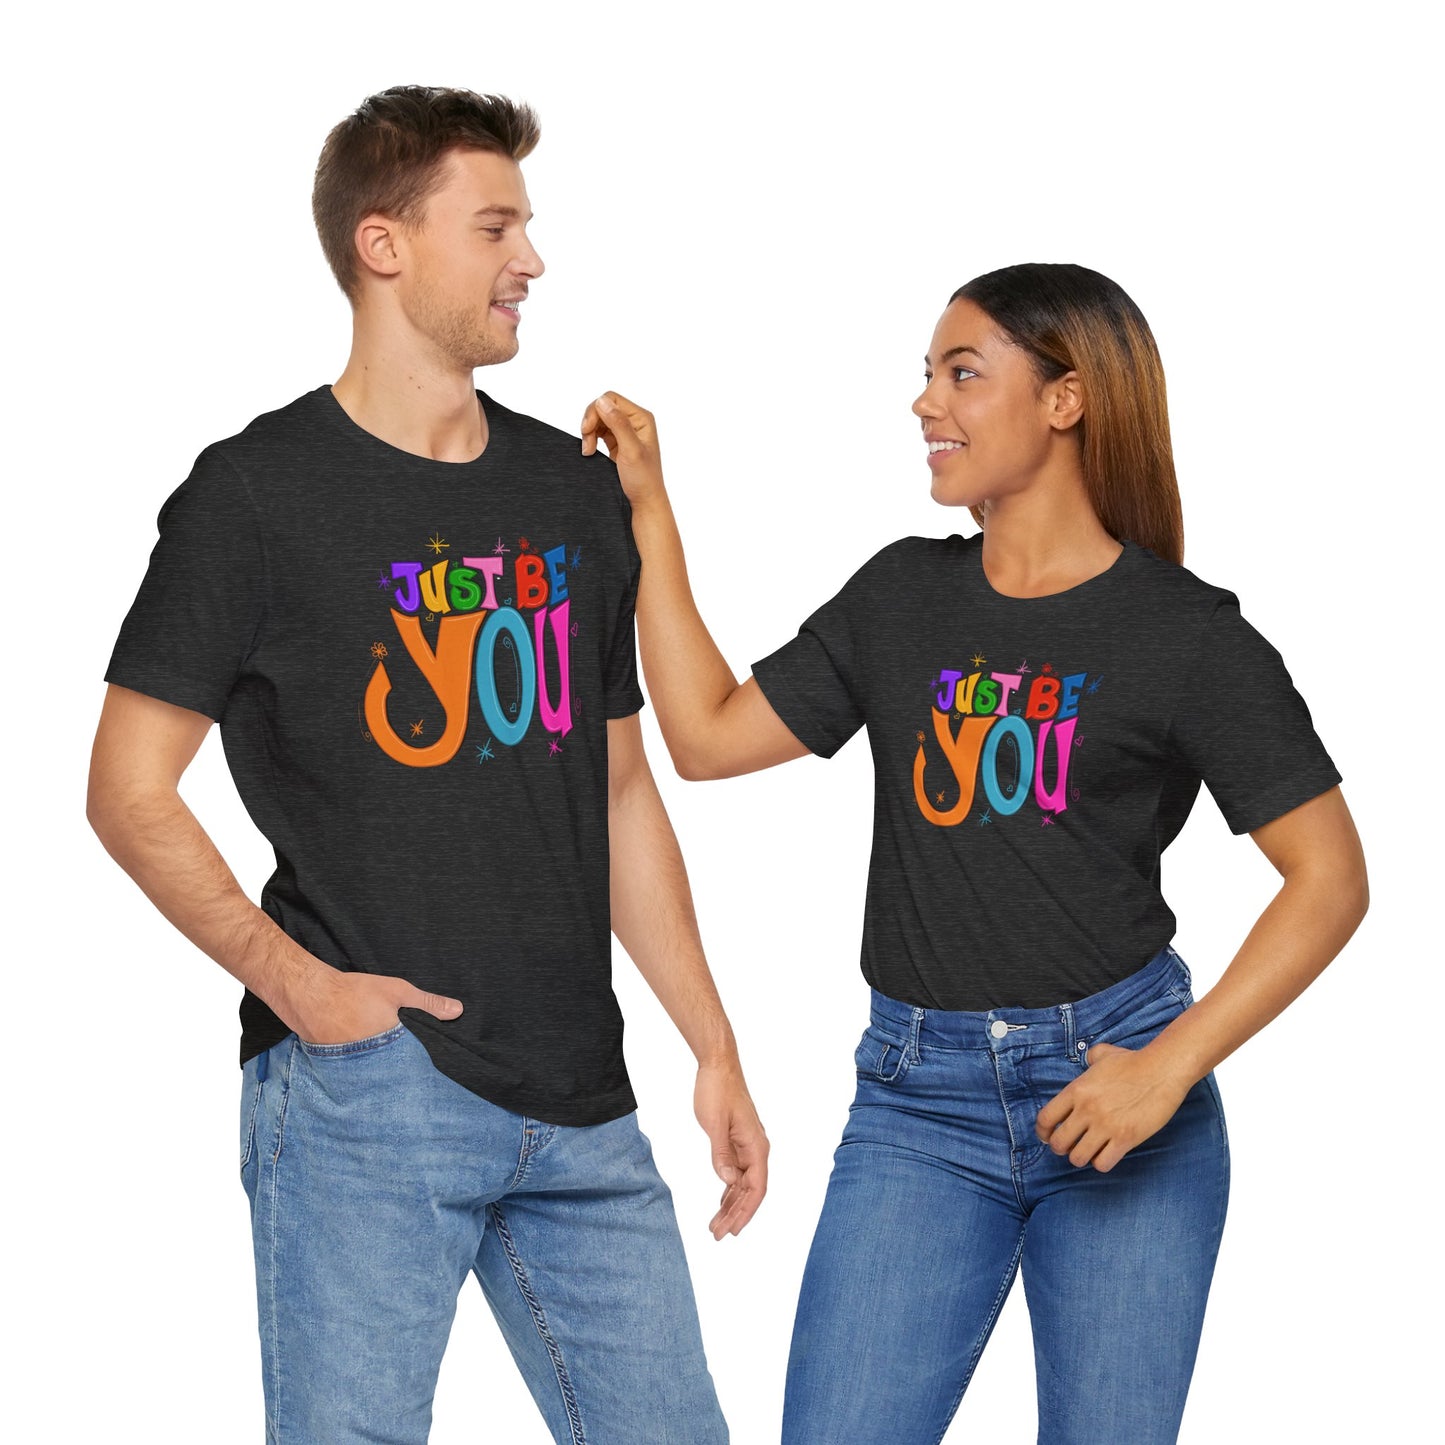 Just Be You Unisex Jersey Short Sleeve T-shirt | Available in Five Colors & Six Sizes | FREE SHIPPING